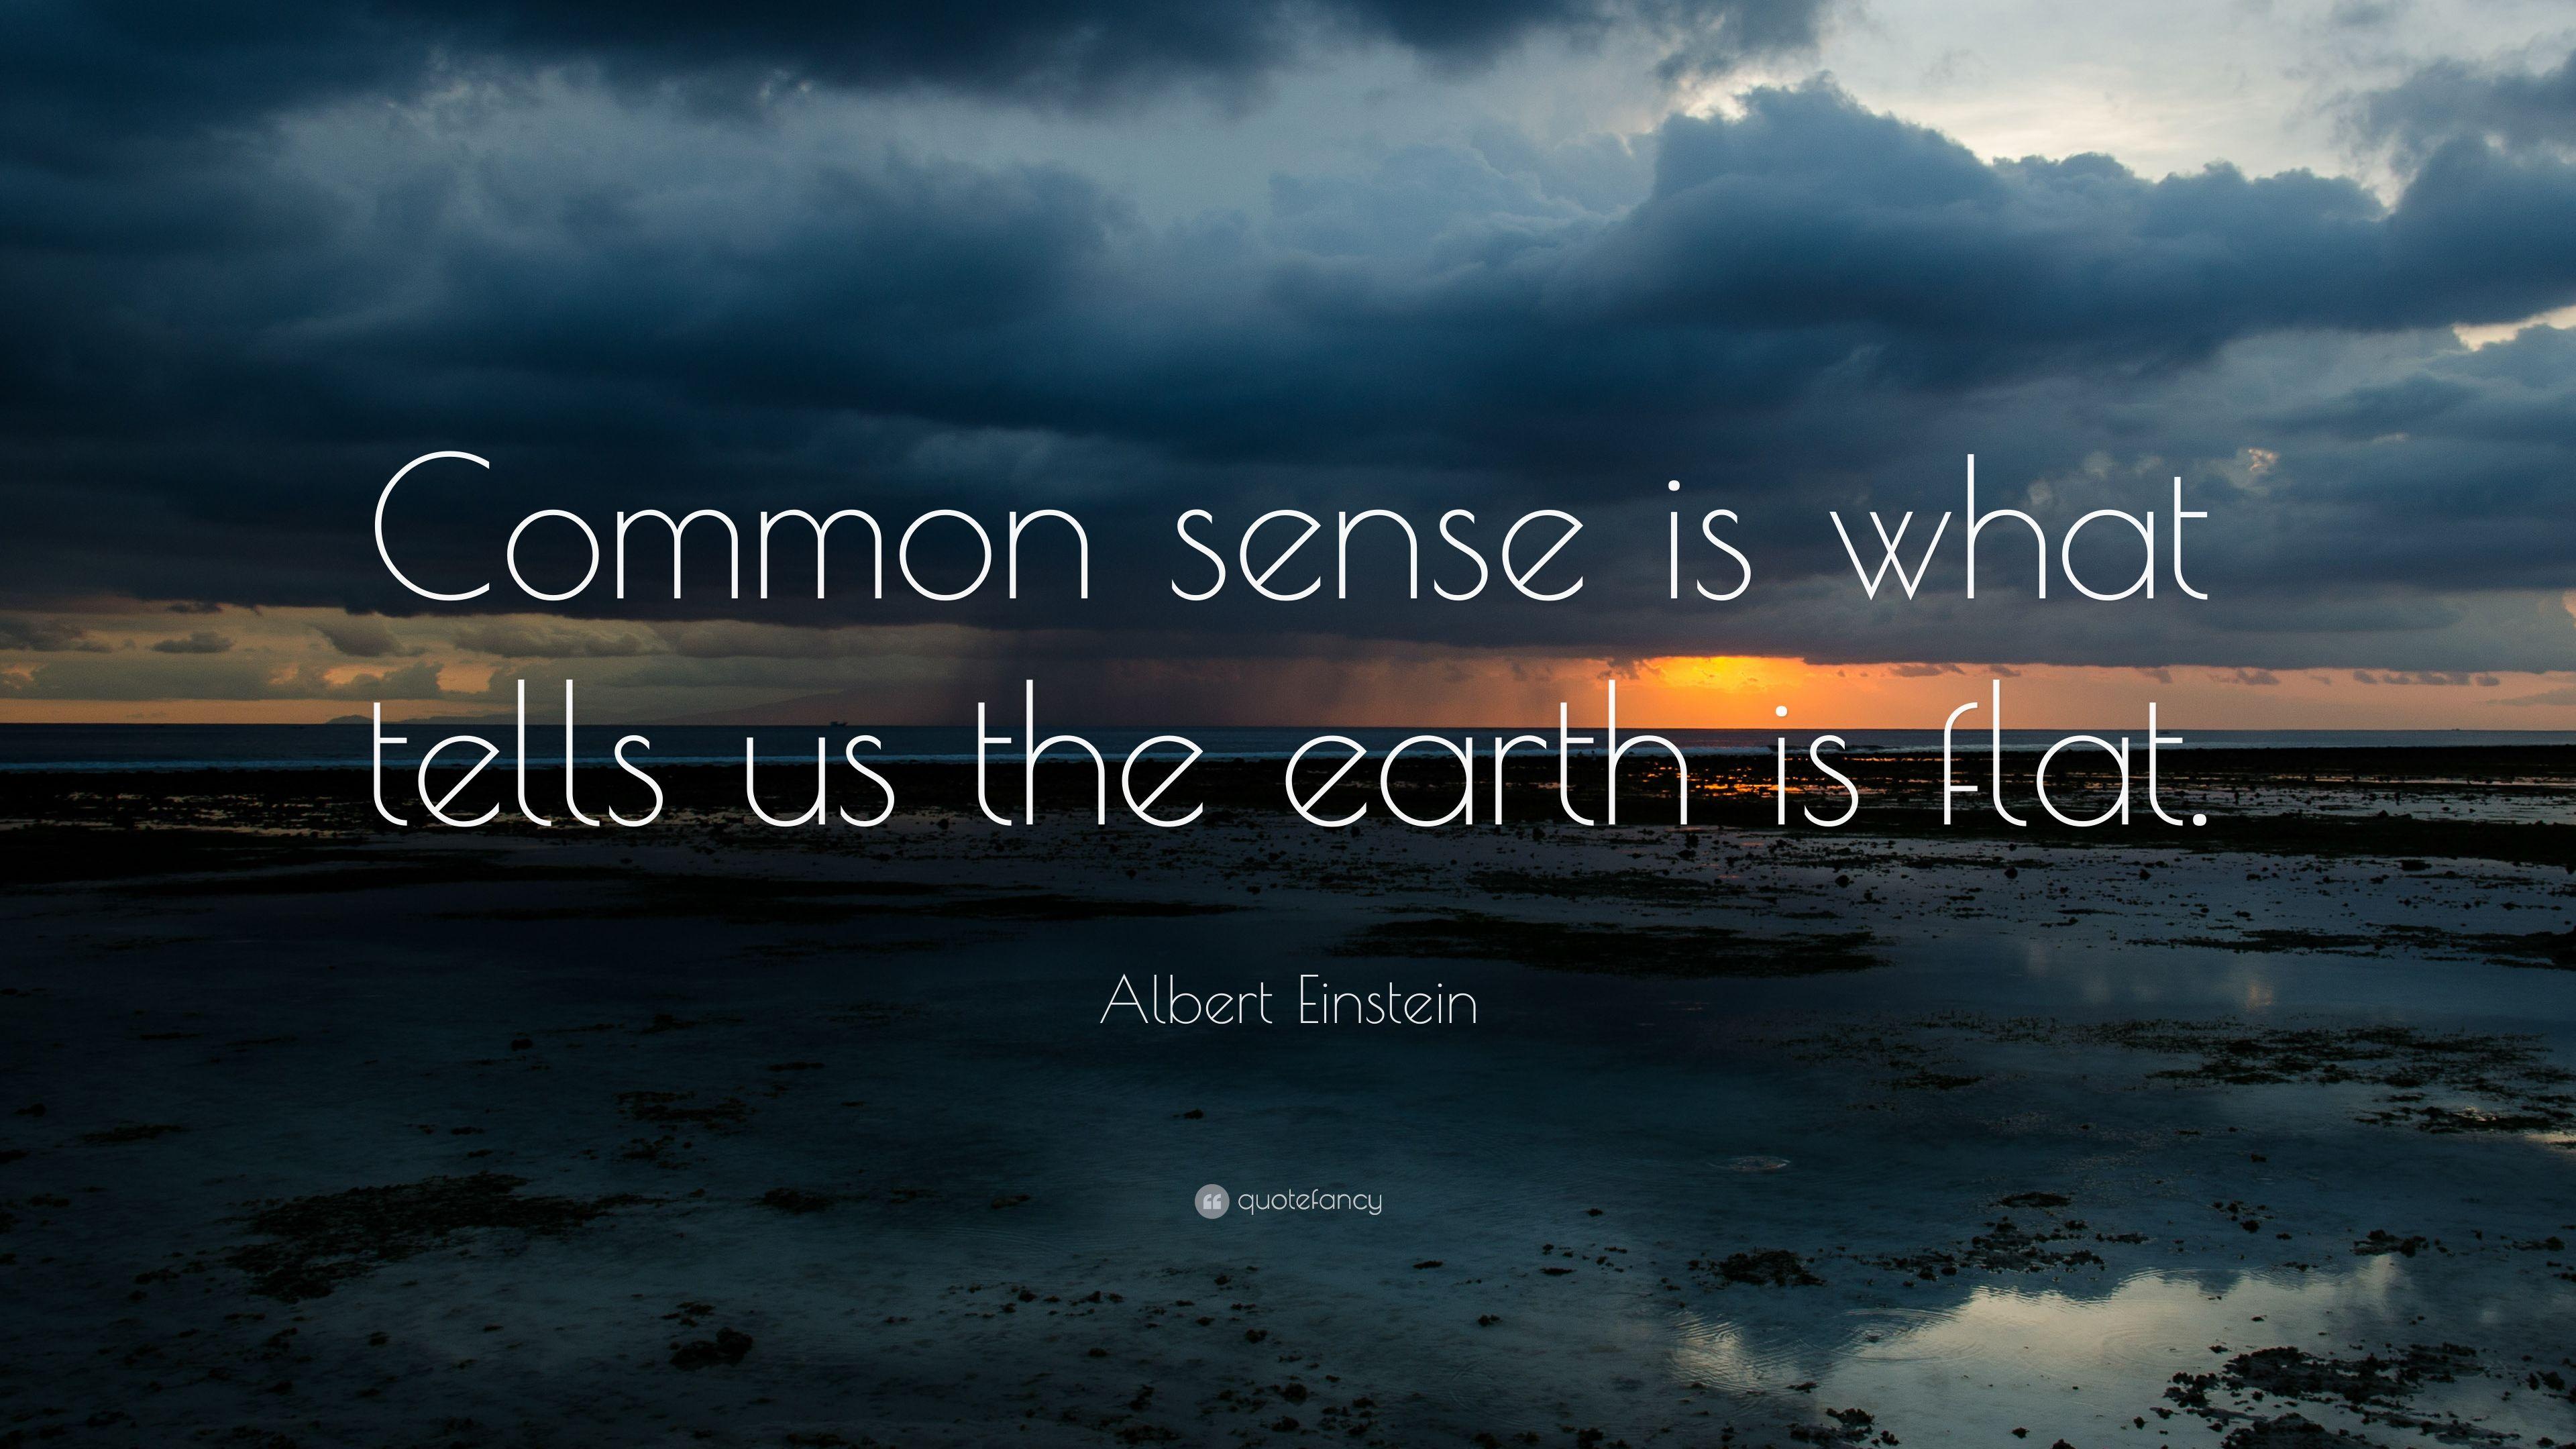 Albert Einstein Quote: “Common sense is what tells us the earth is